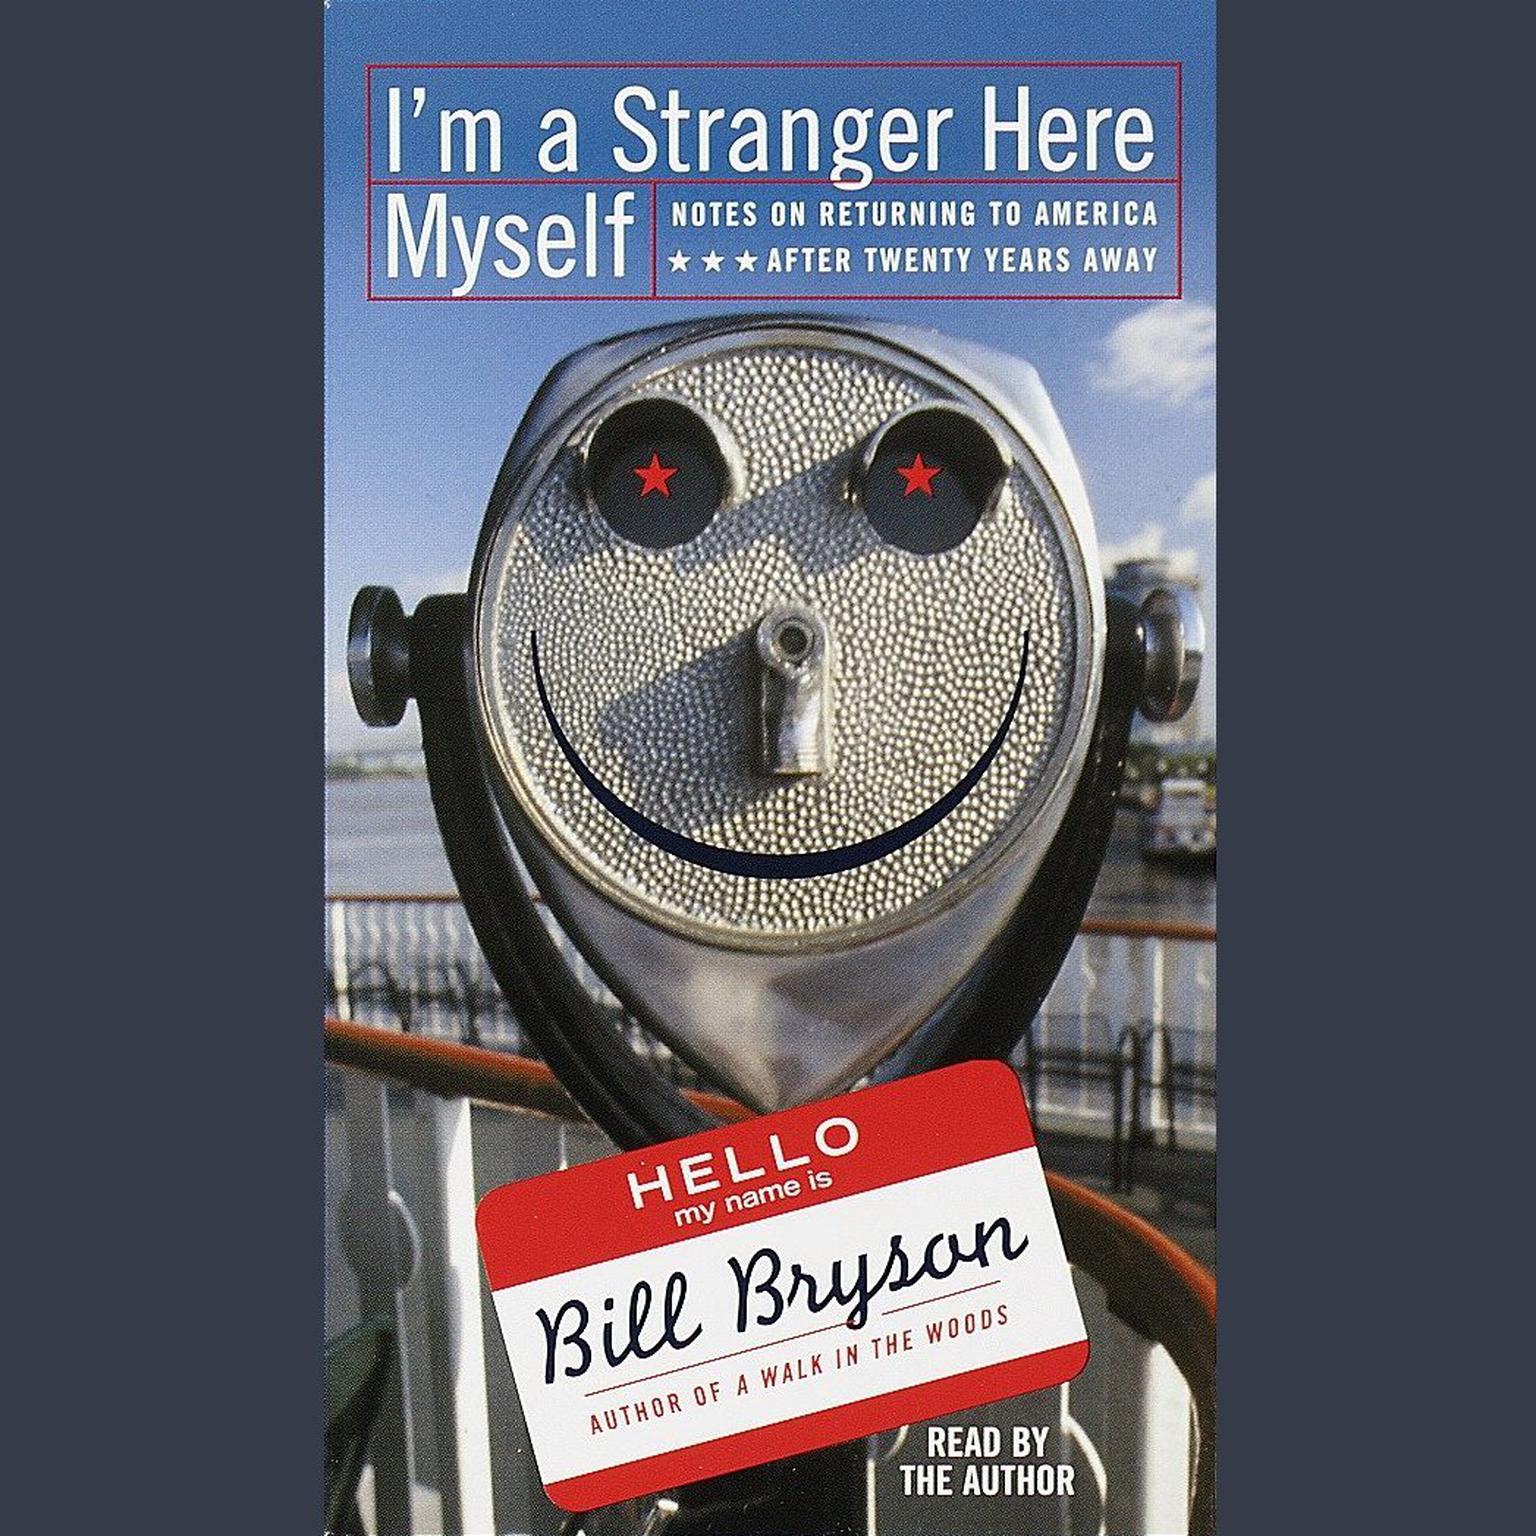 Im a Stranger Here Myself (Abridged): Notes on Returning to America After 20 Years Away Audiobook, by Bill Bryson